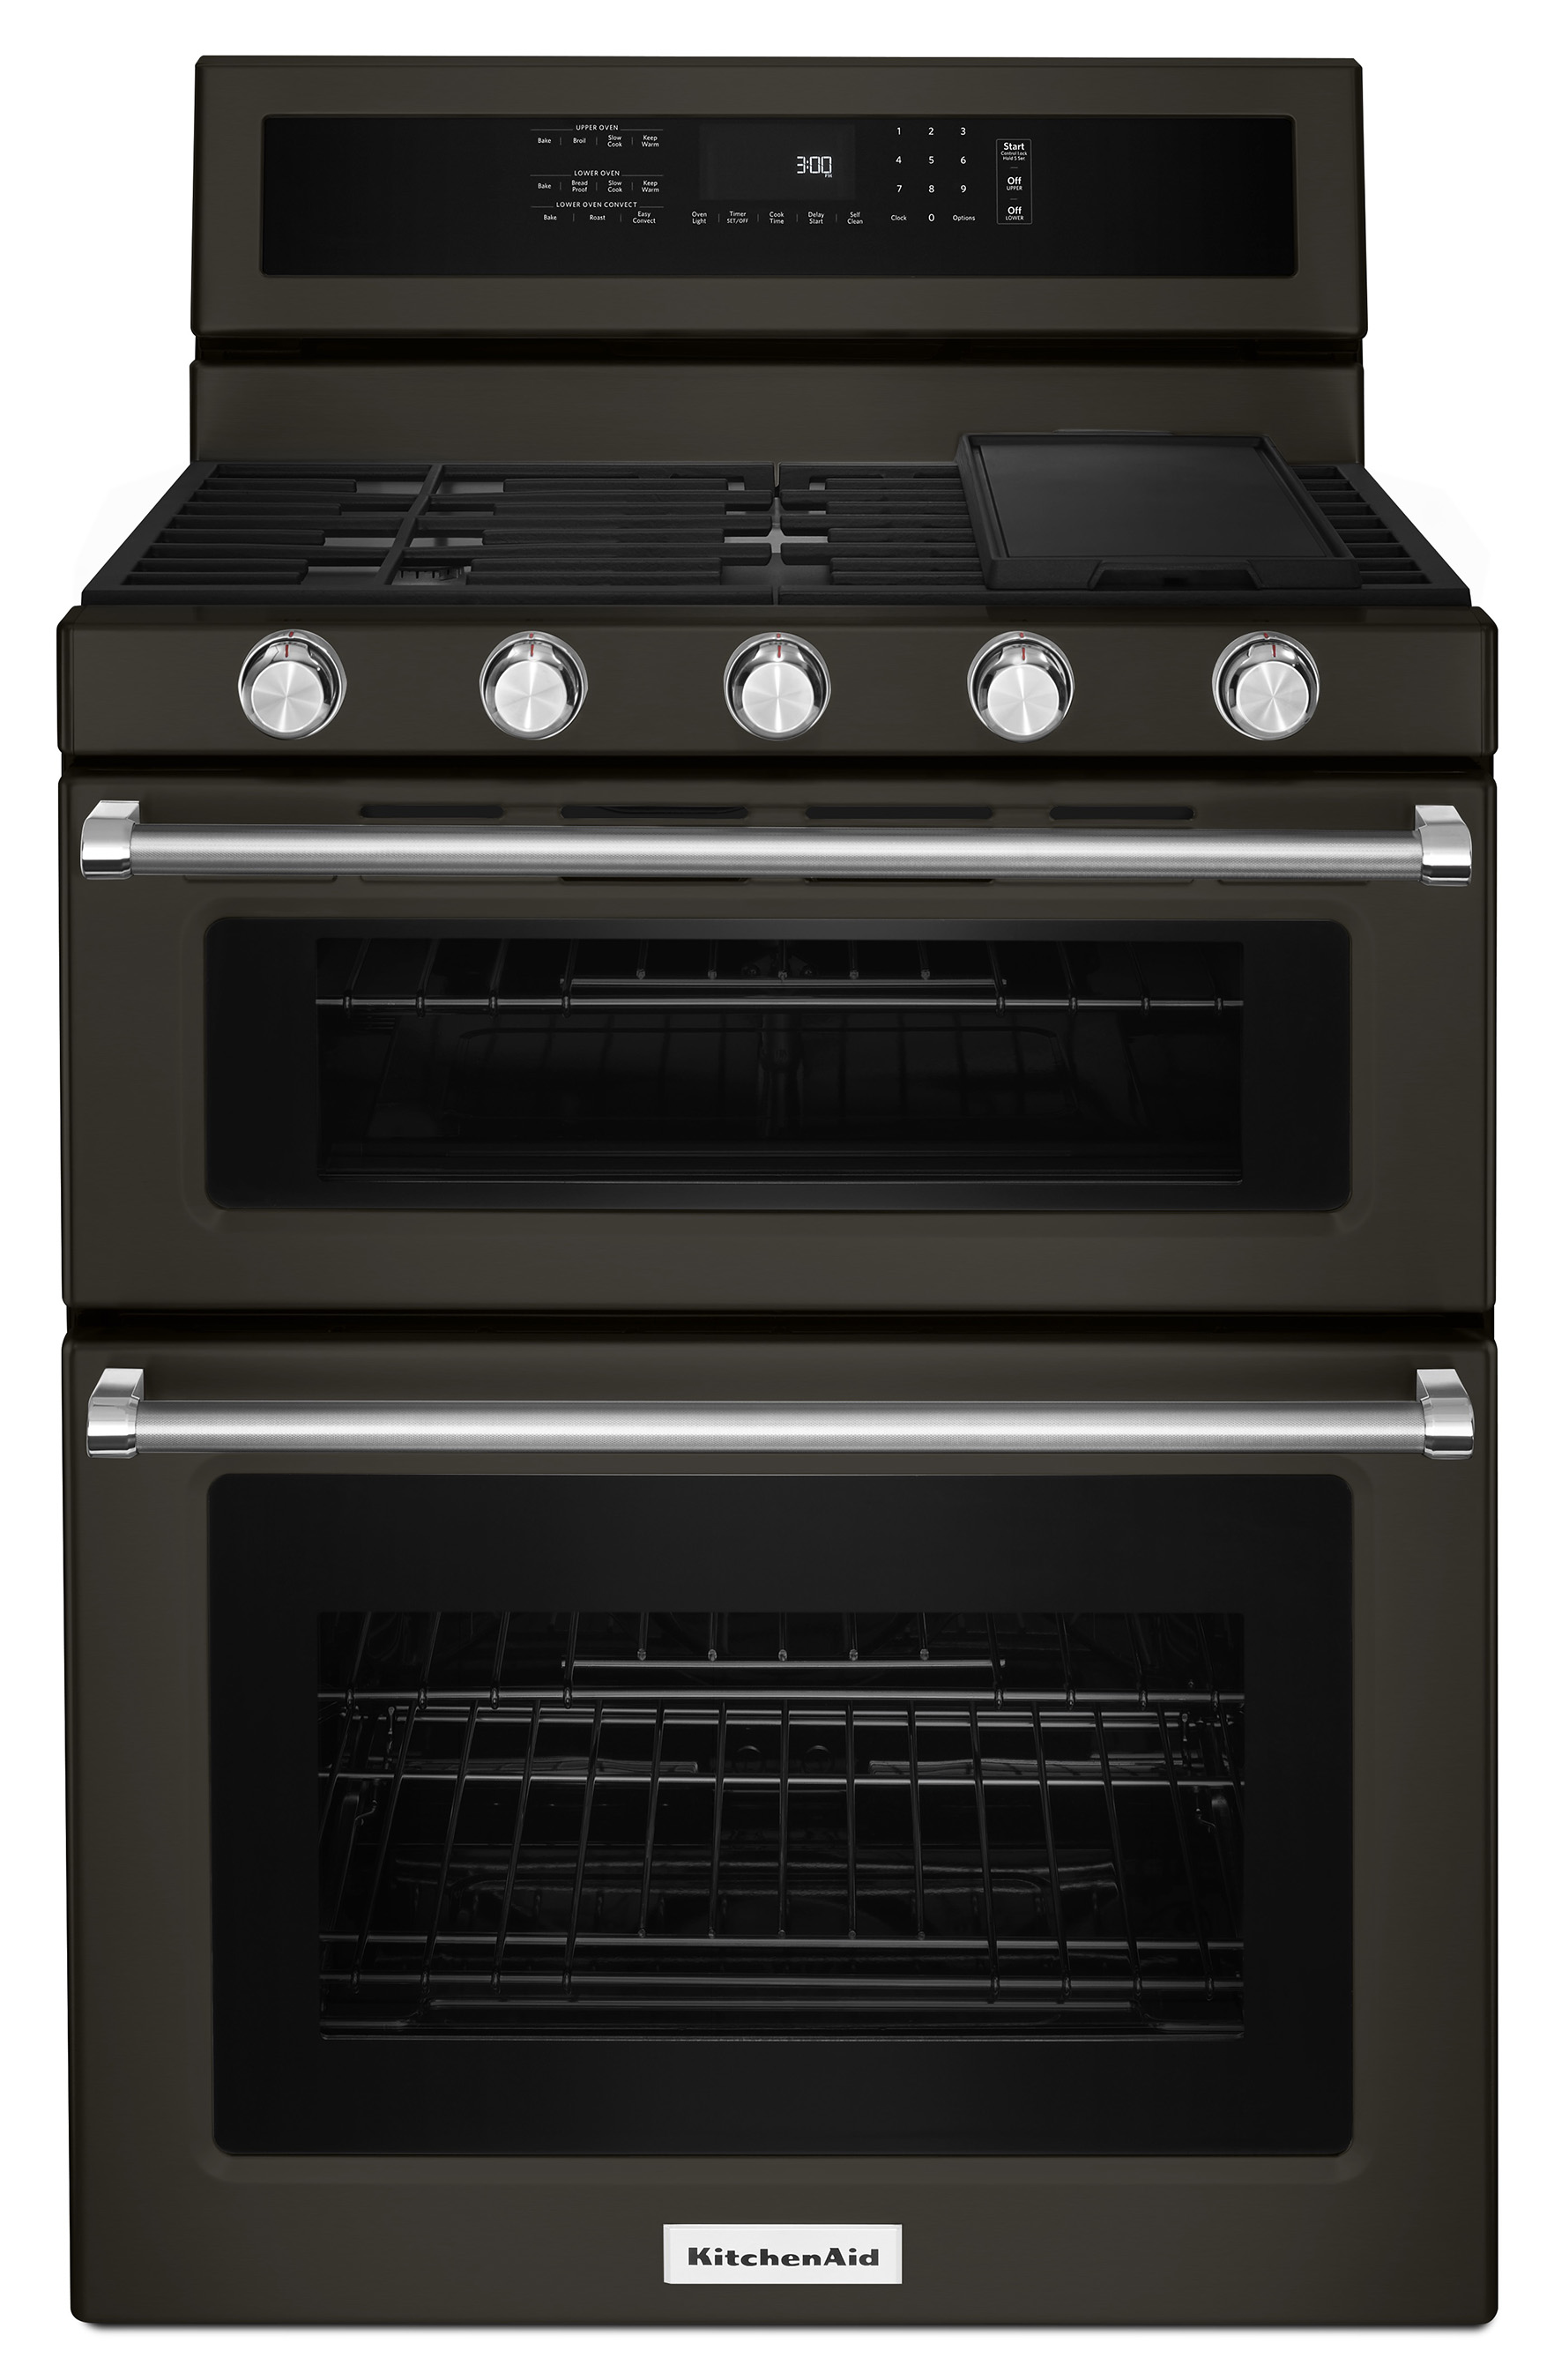 New black stainless offerings include six models of slide-in ranges, freestanding ranges and freestanding double oven ranges.